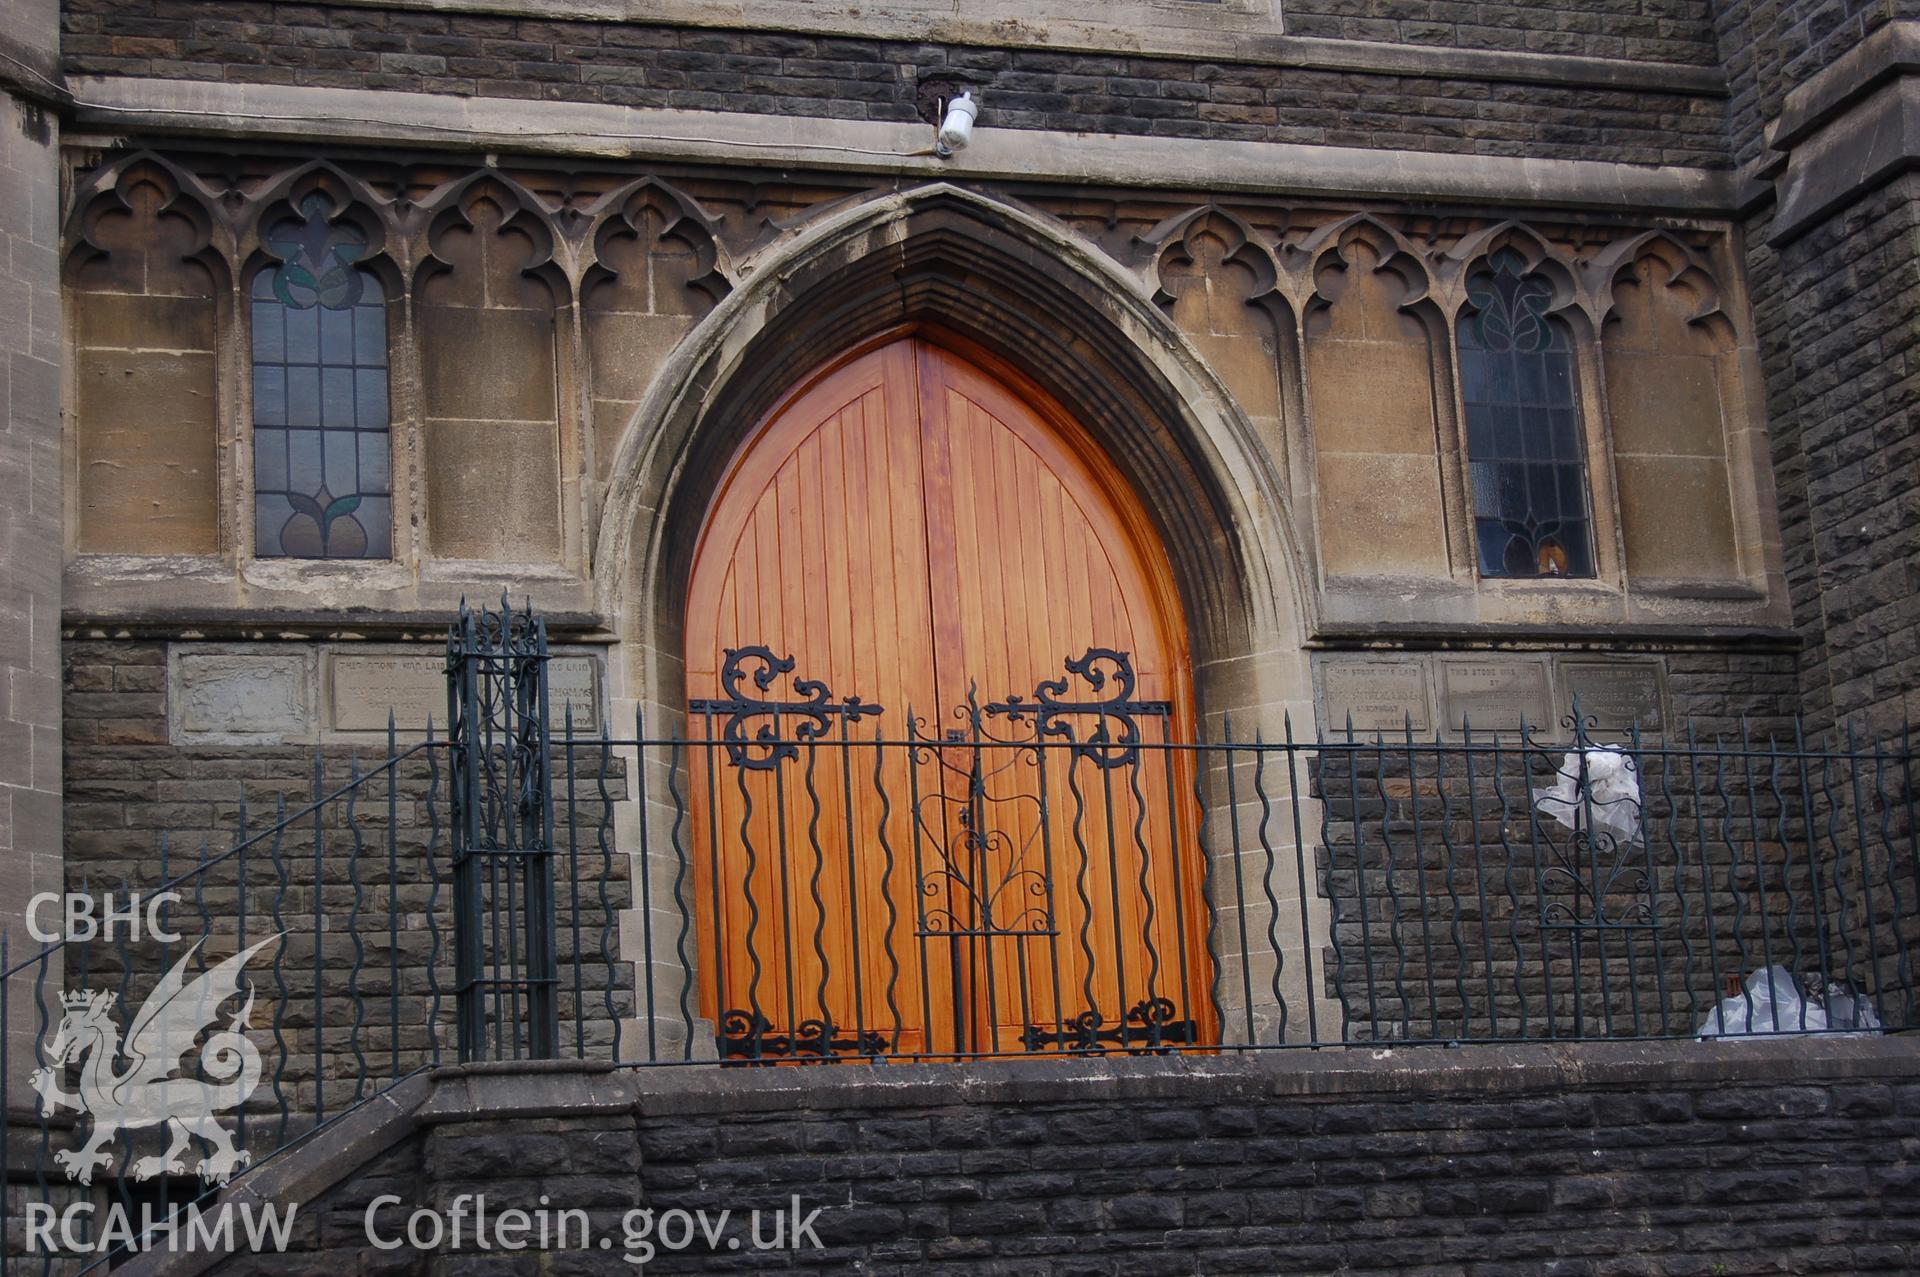 Digital colour photograph showing an exterior view of the Van Road United Reformed Church main door, after renovation.